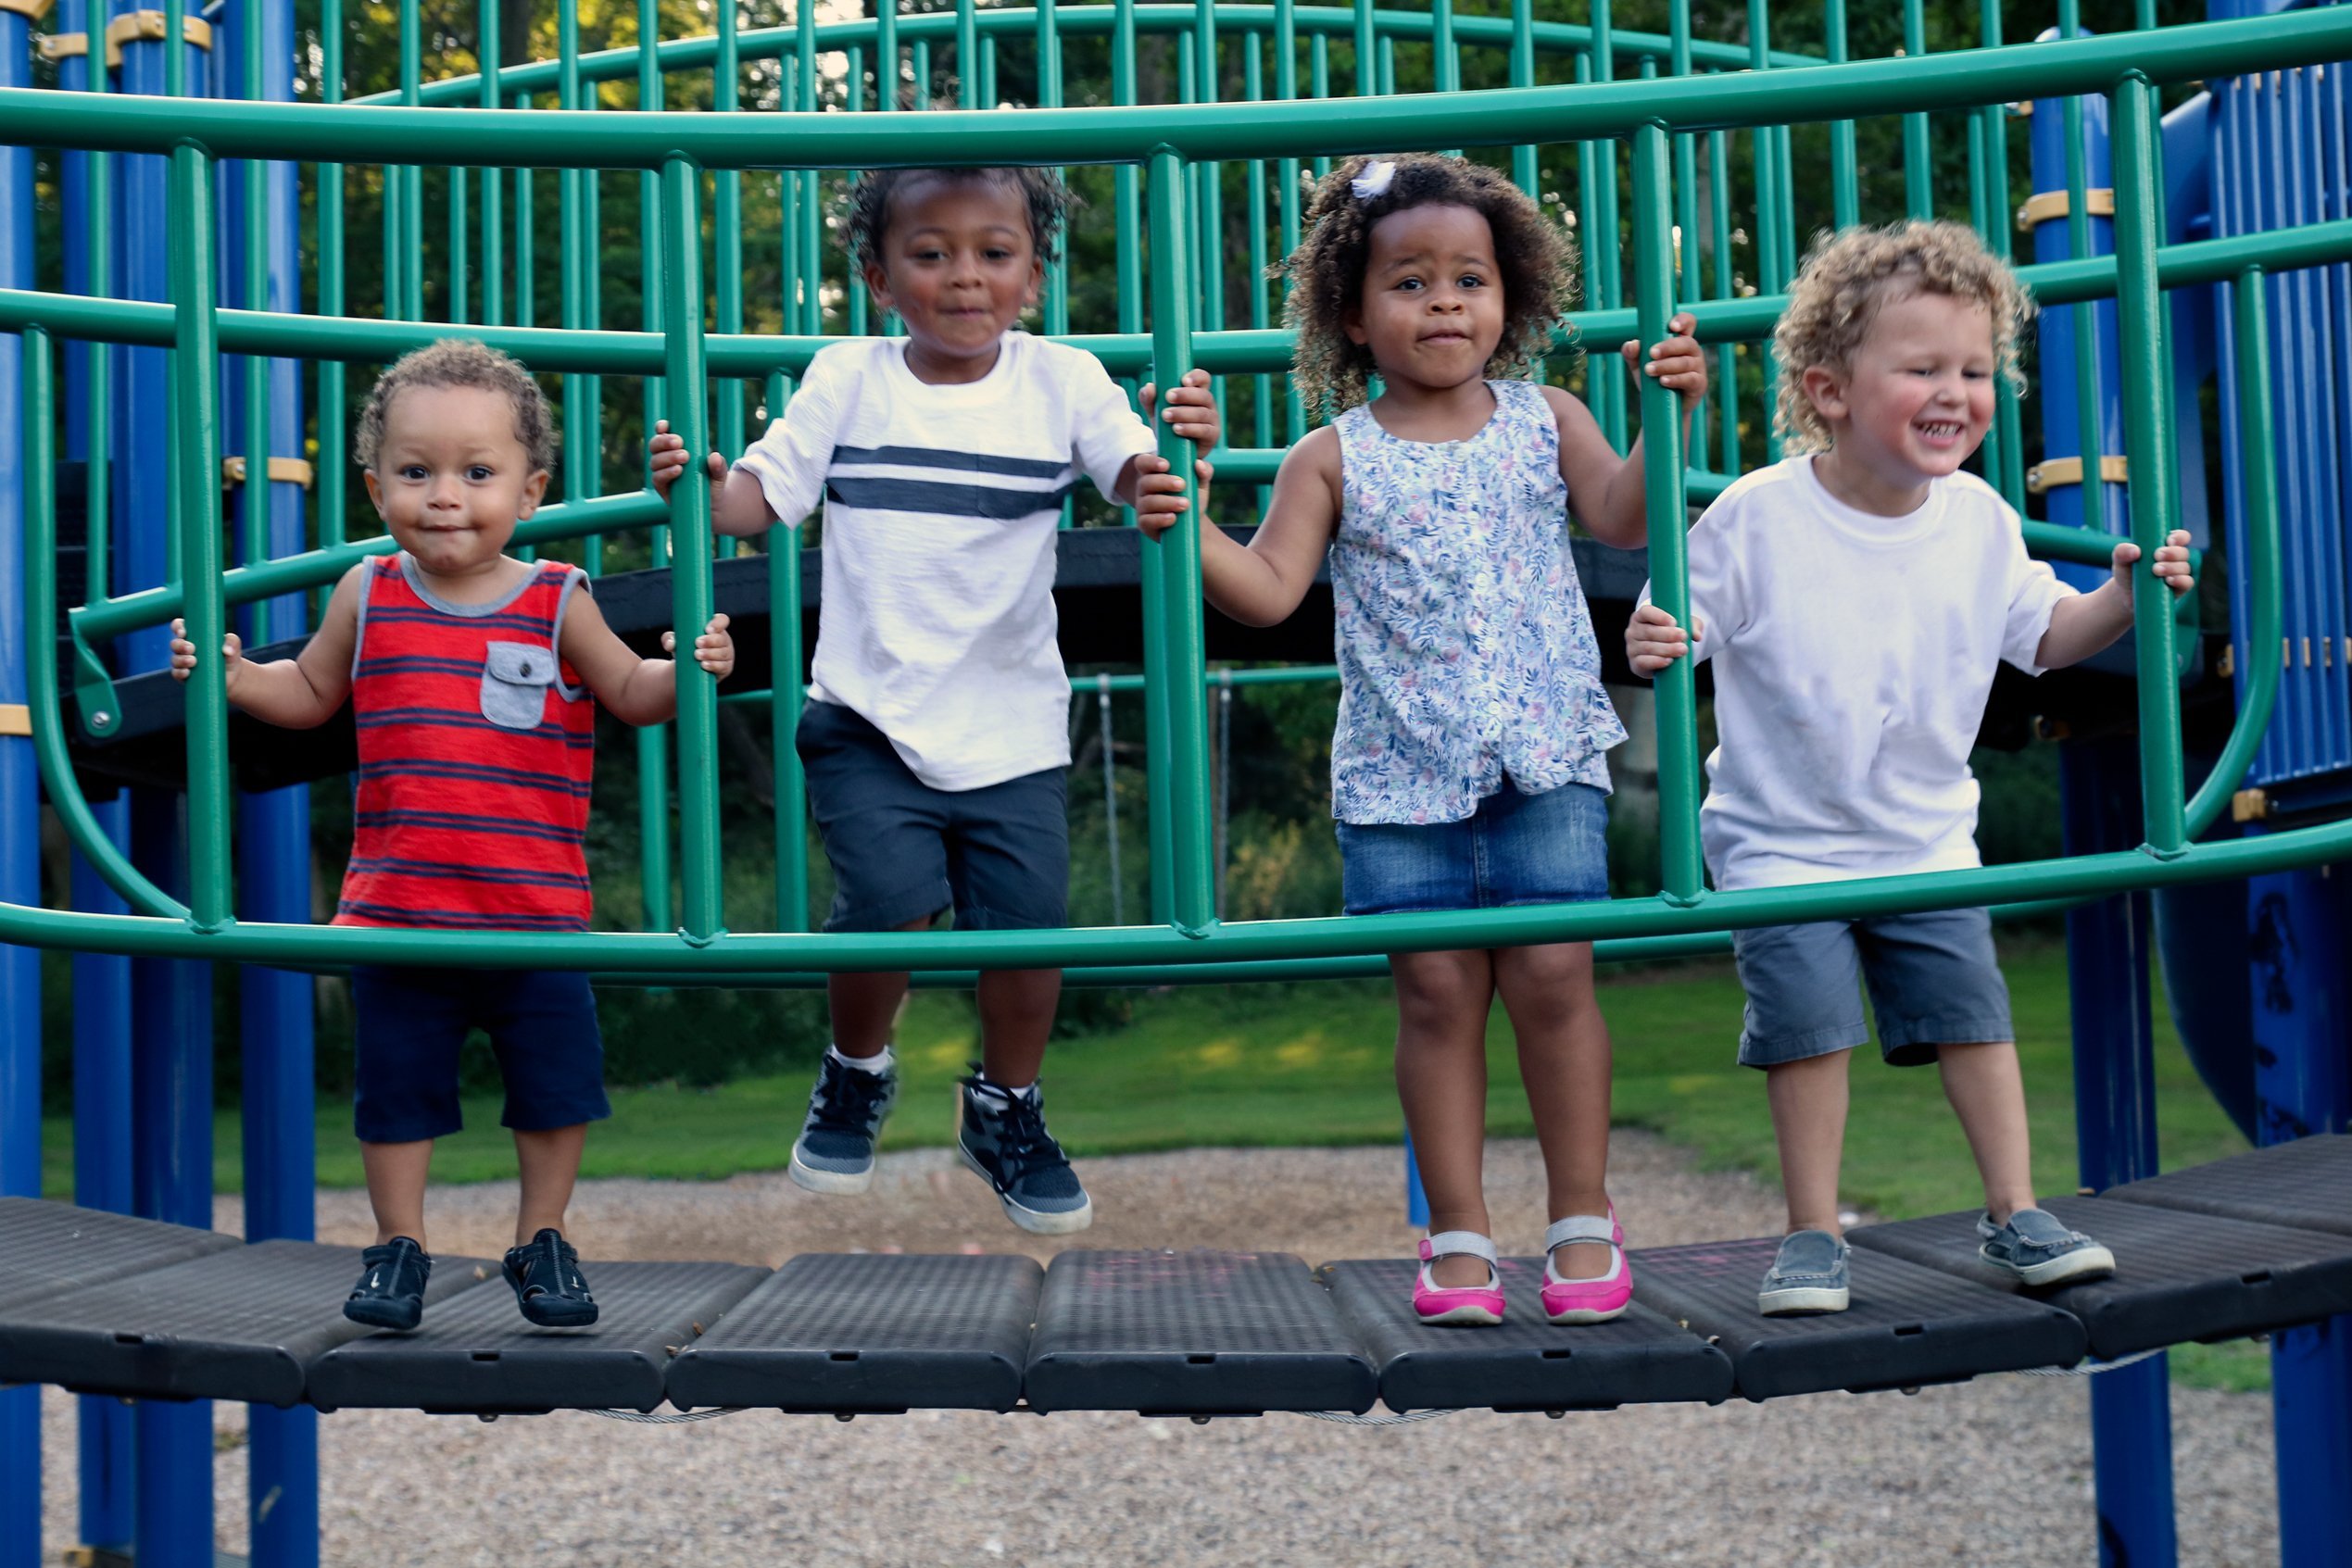 A diverse group of four children are playing together at the park | Photo: Shutterstock.com